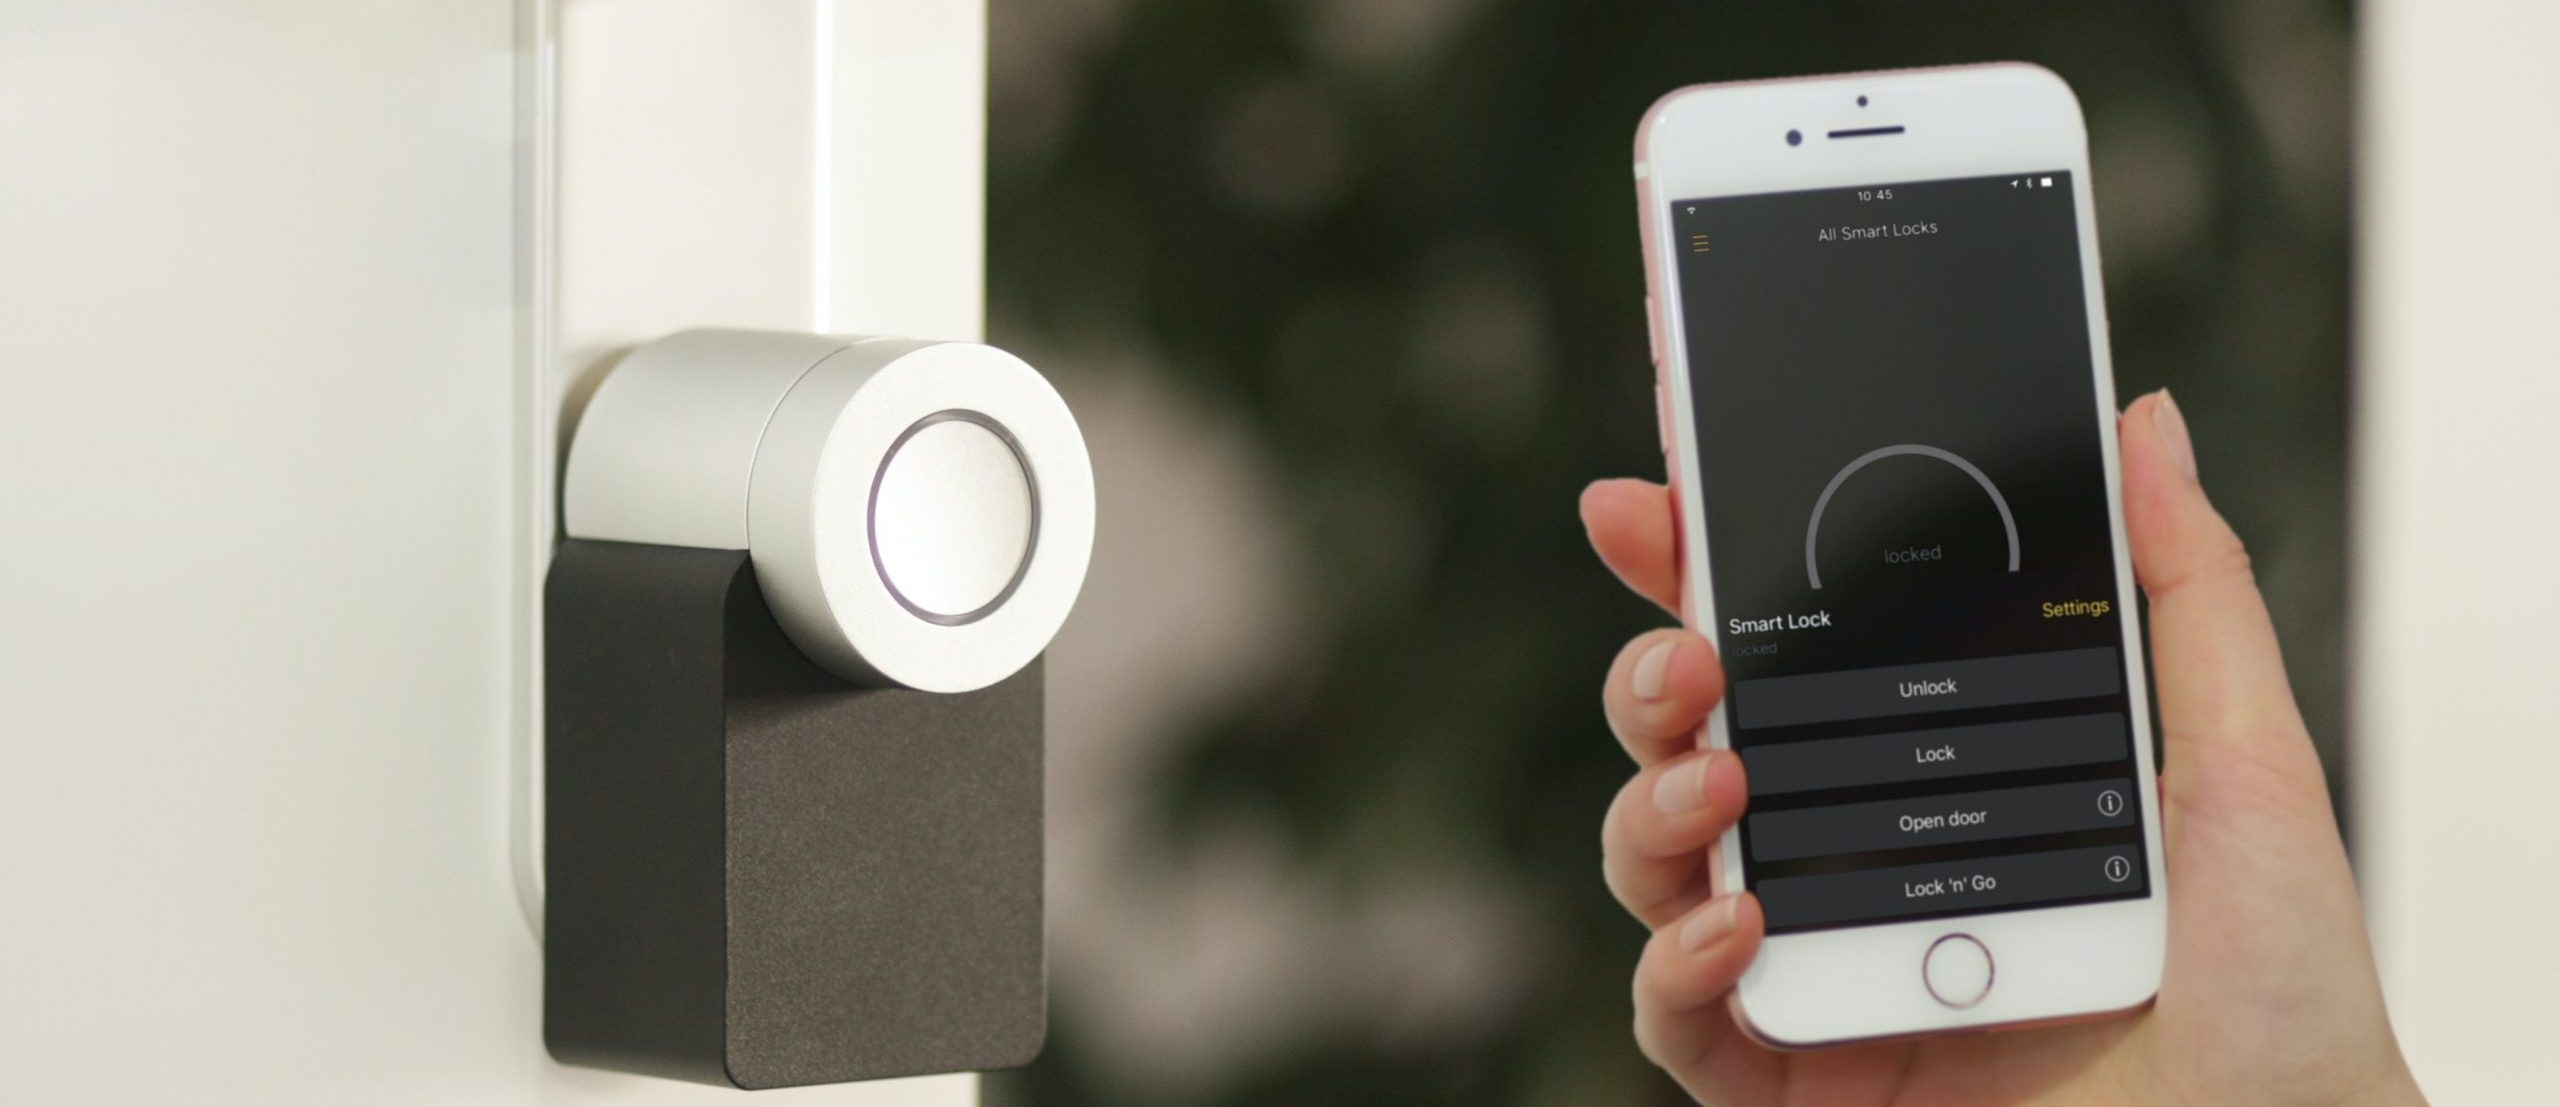 An Apple iPhone controlling home security